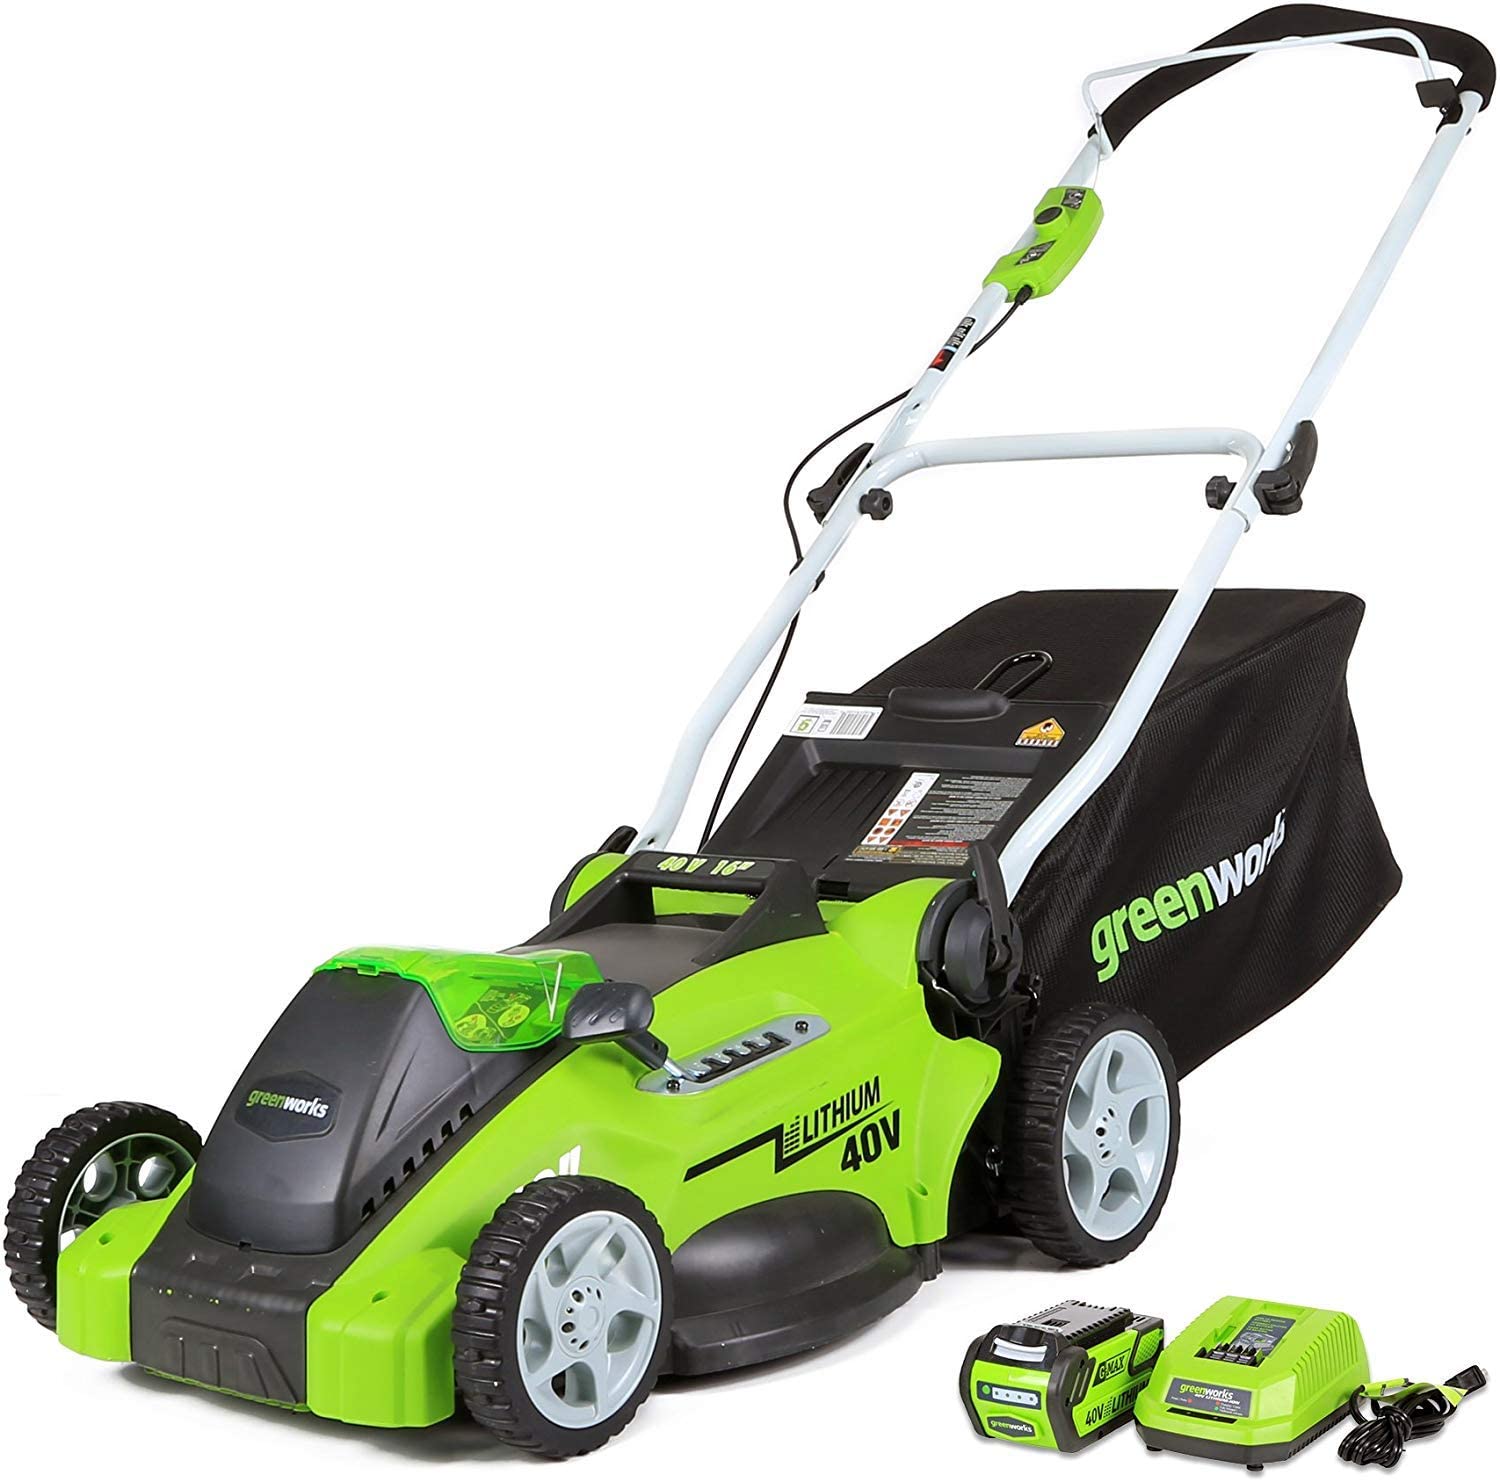 Greenworks 25322 Cordless Lawn Mower review